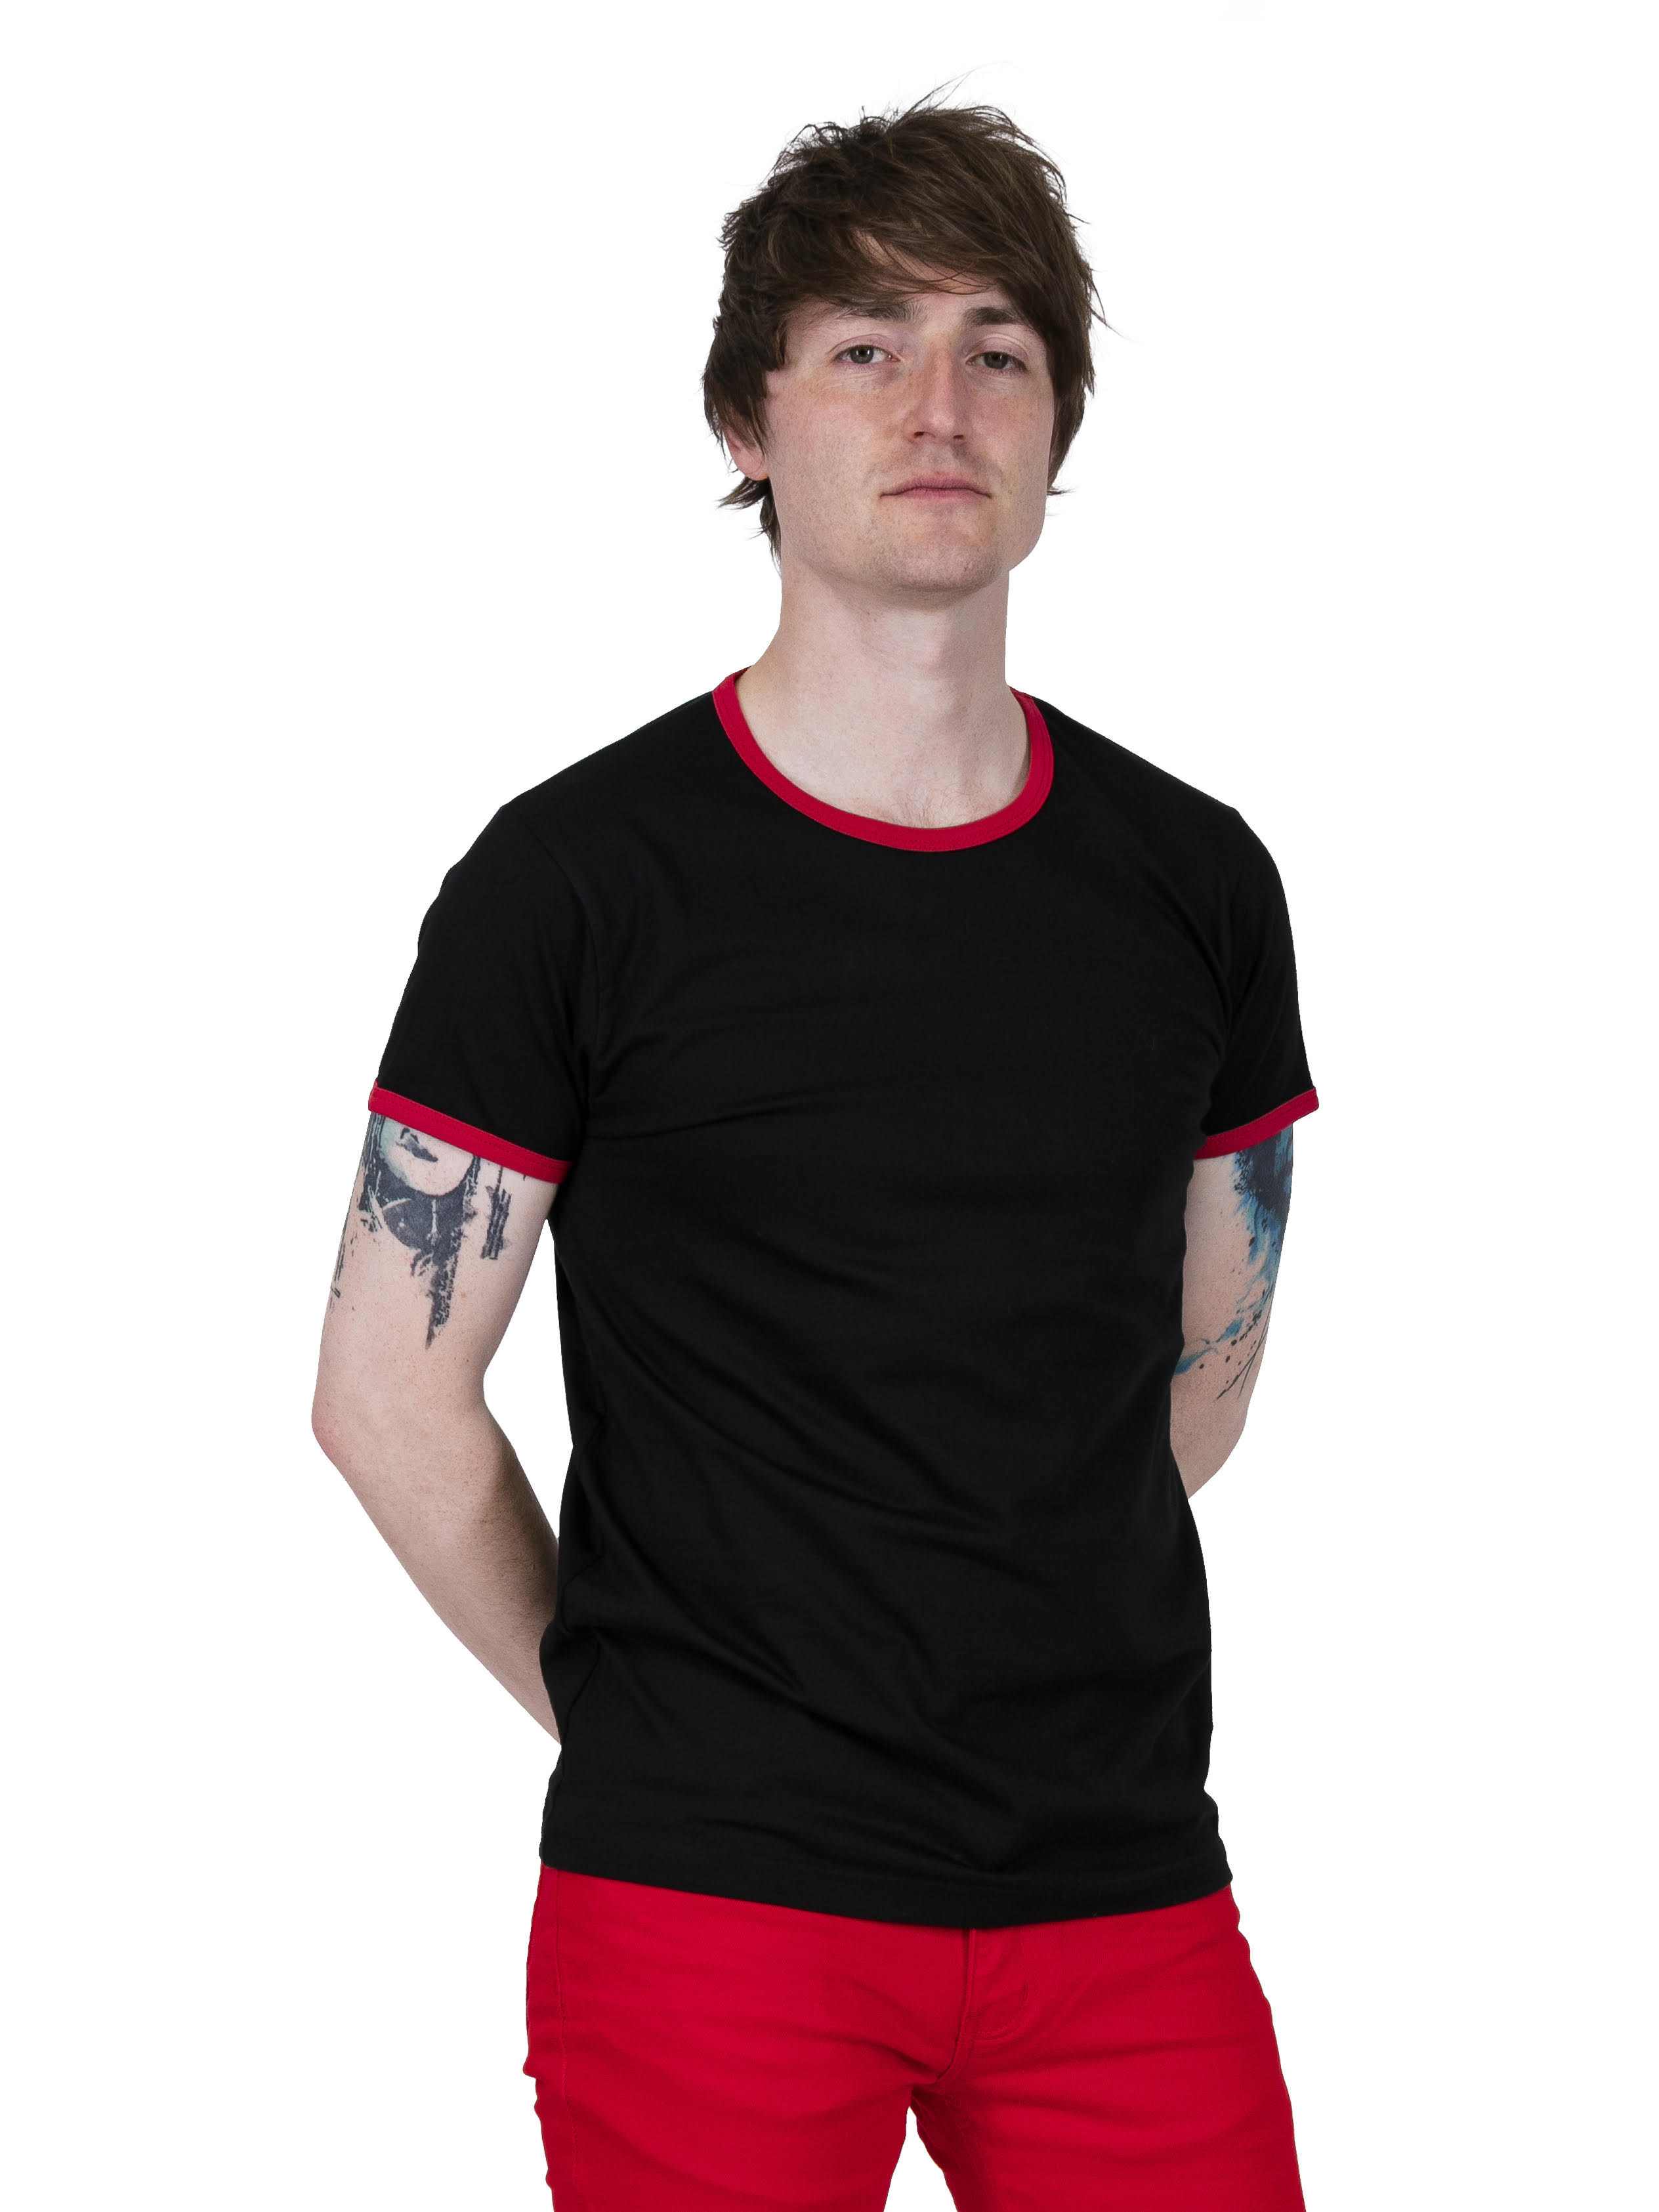 mens black and red t shirt